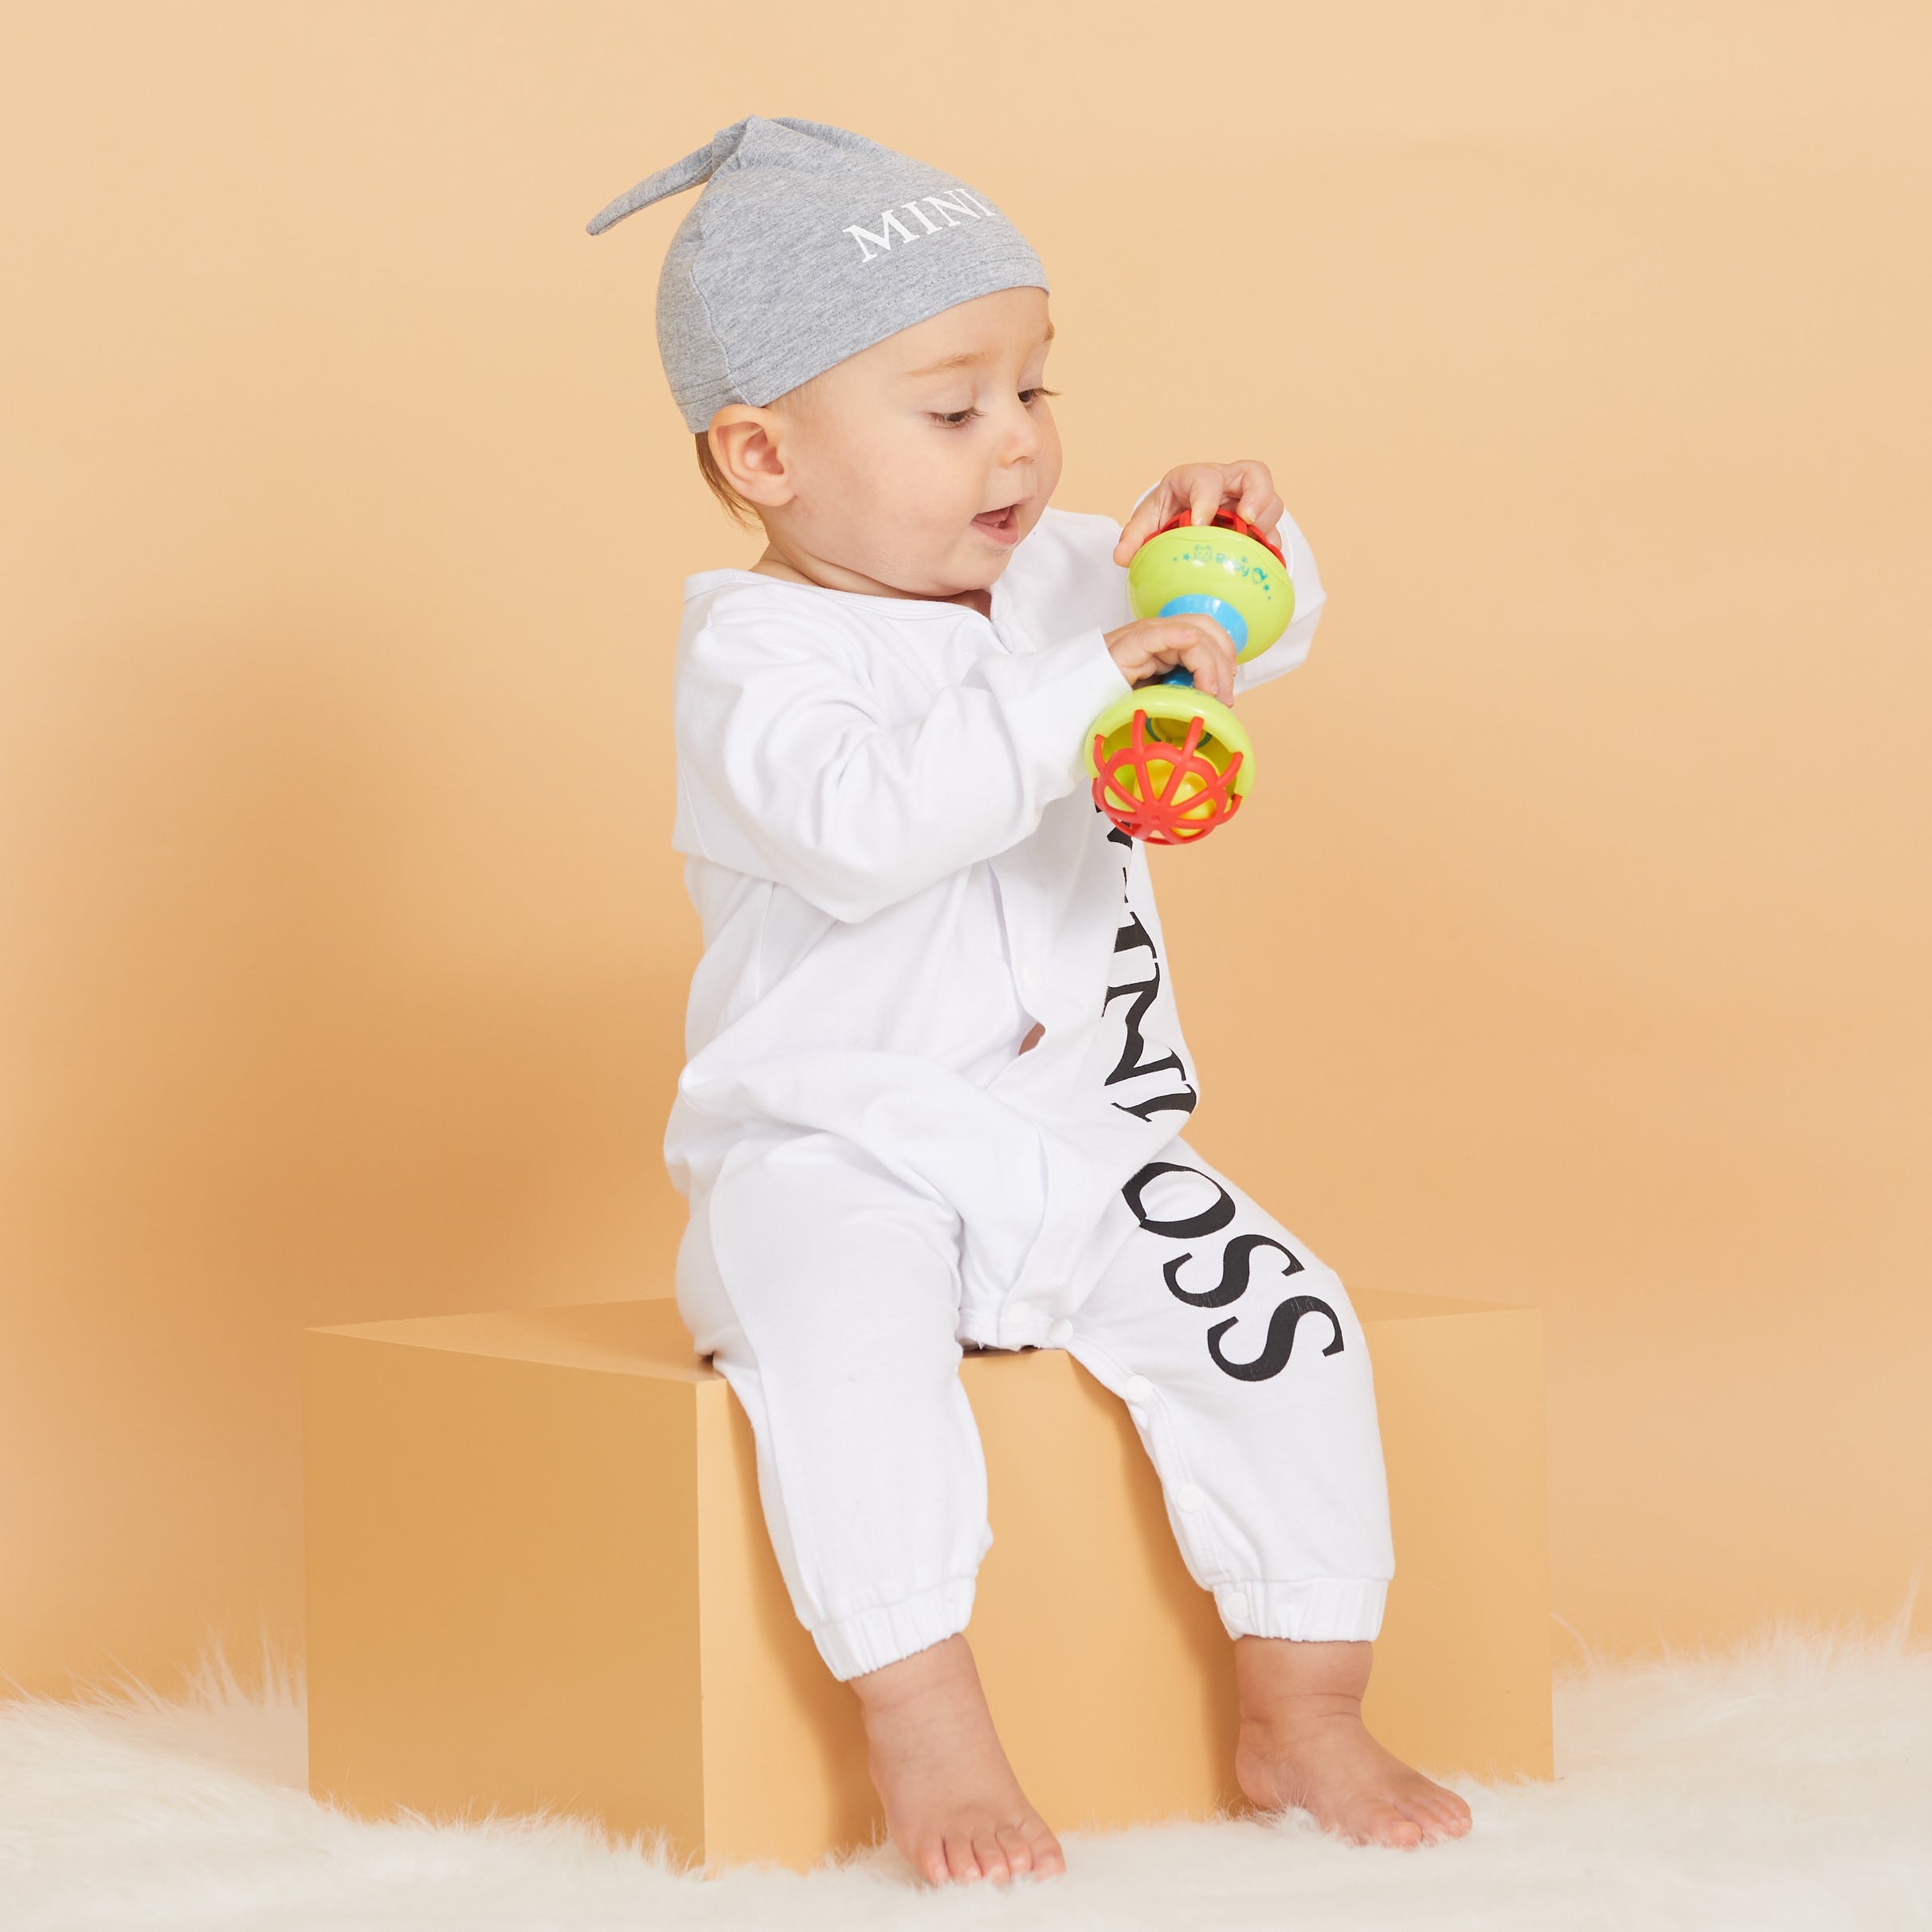 PatPat Hot Sales 2021 Spring and Summer Baby Boy MINI BOSS Baby Rompers with Hat Short and Long Sleeve Baby‘s Clothing